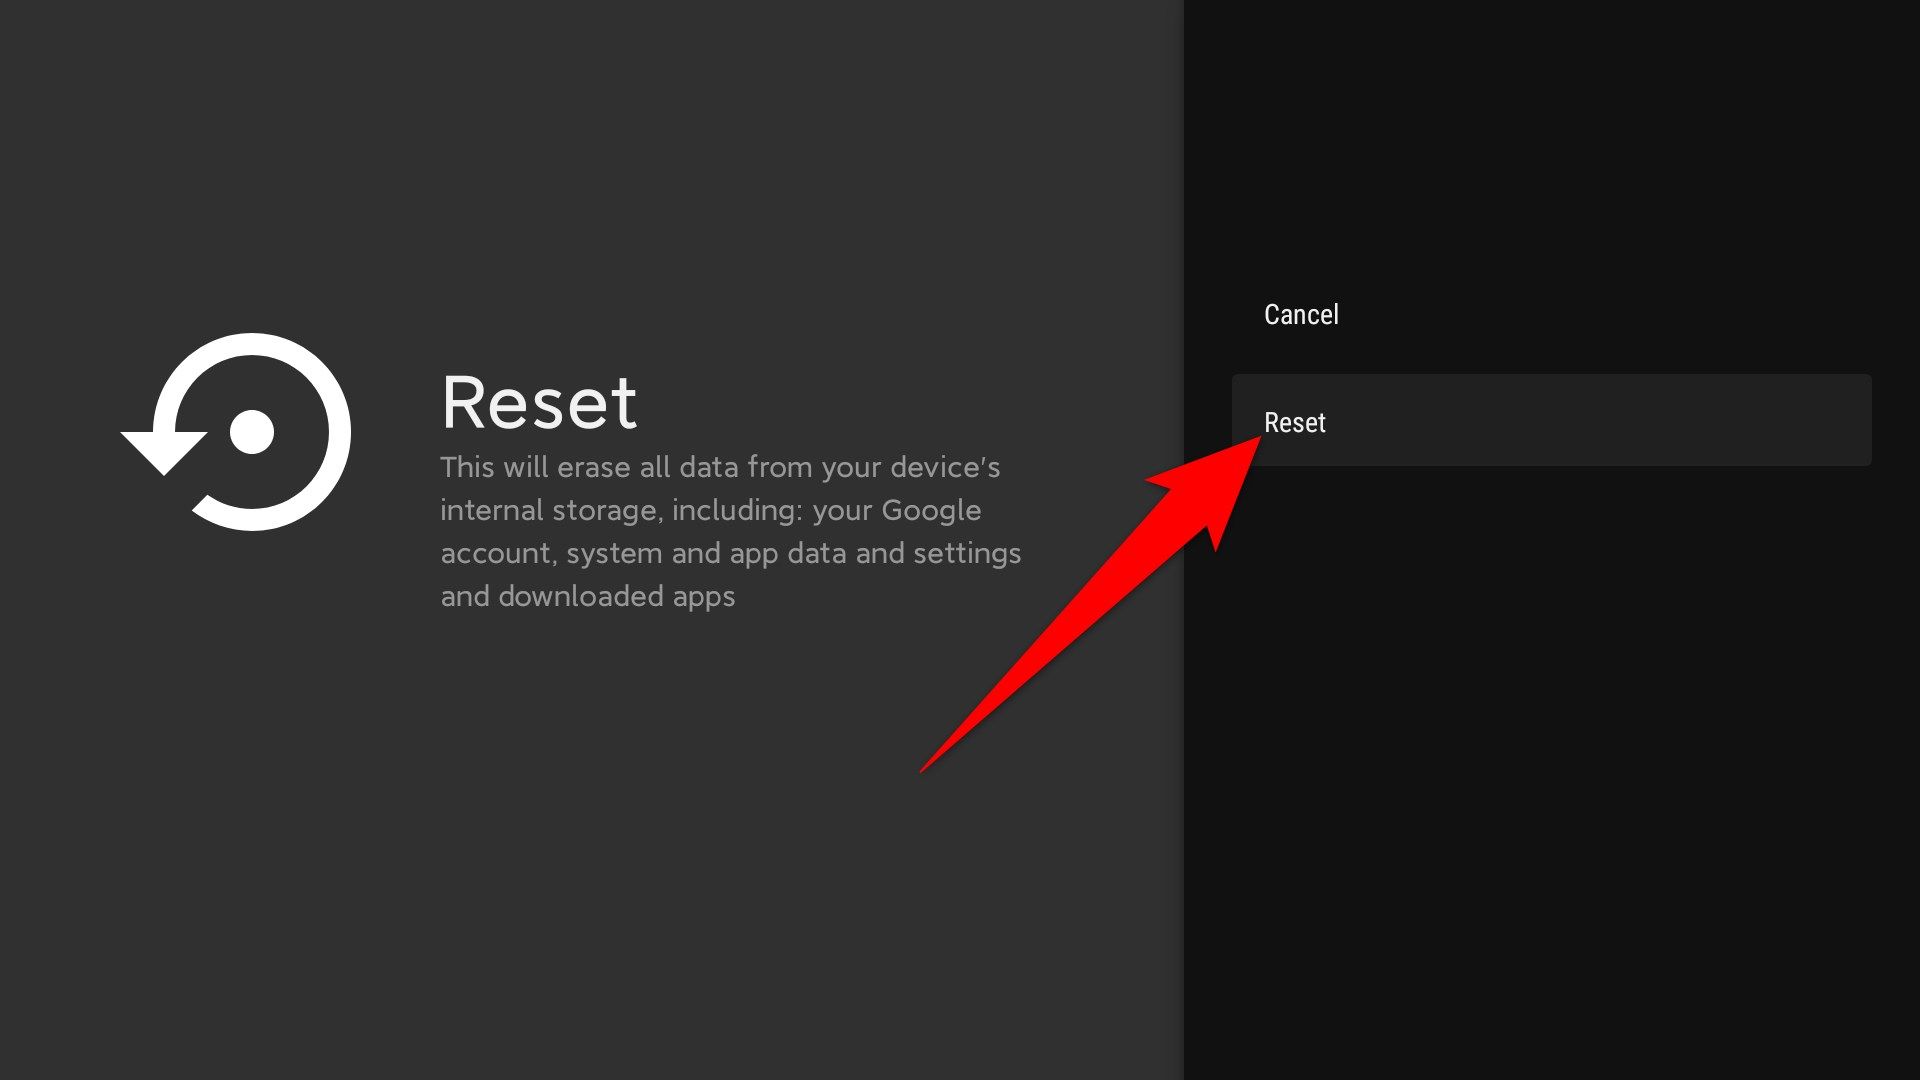 Android TV reset confirmation pop up